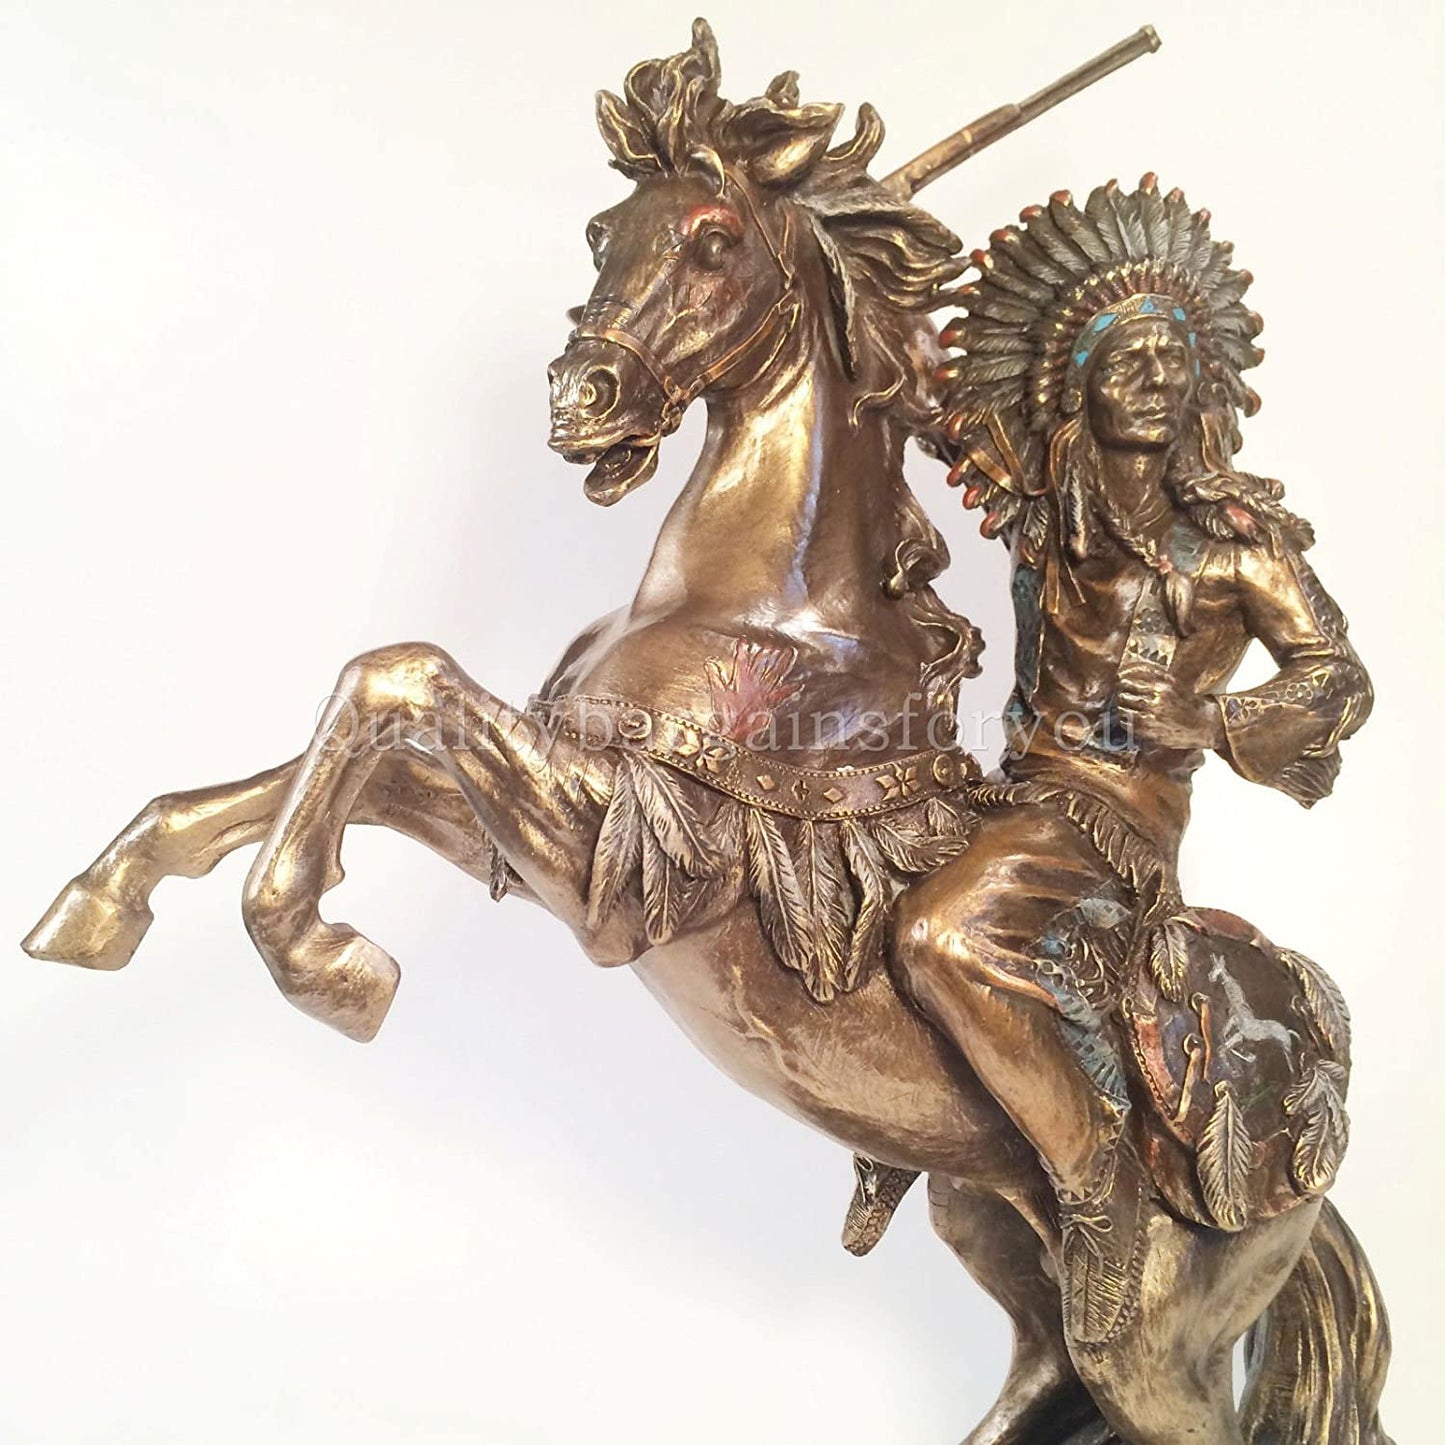 Sioux Chief Raising Rifle On A Rearing Horse